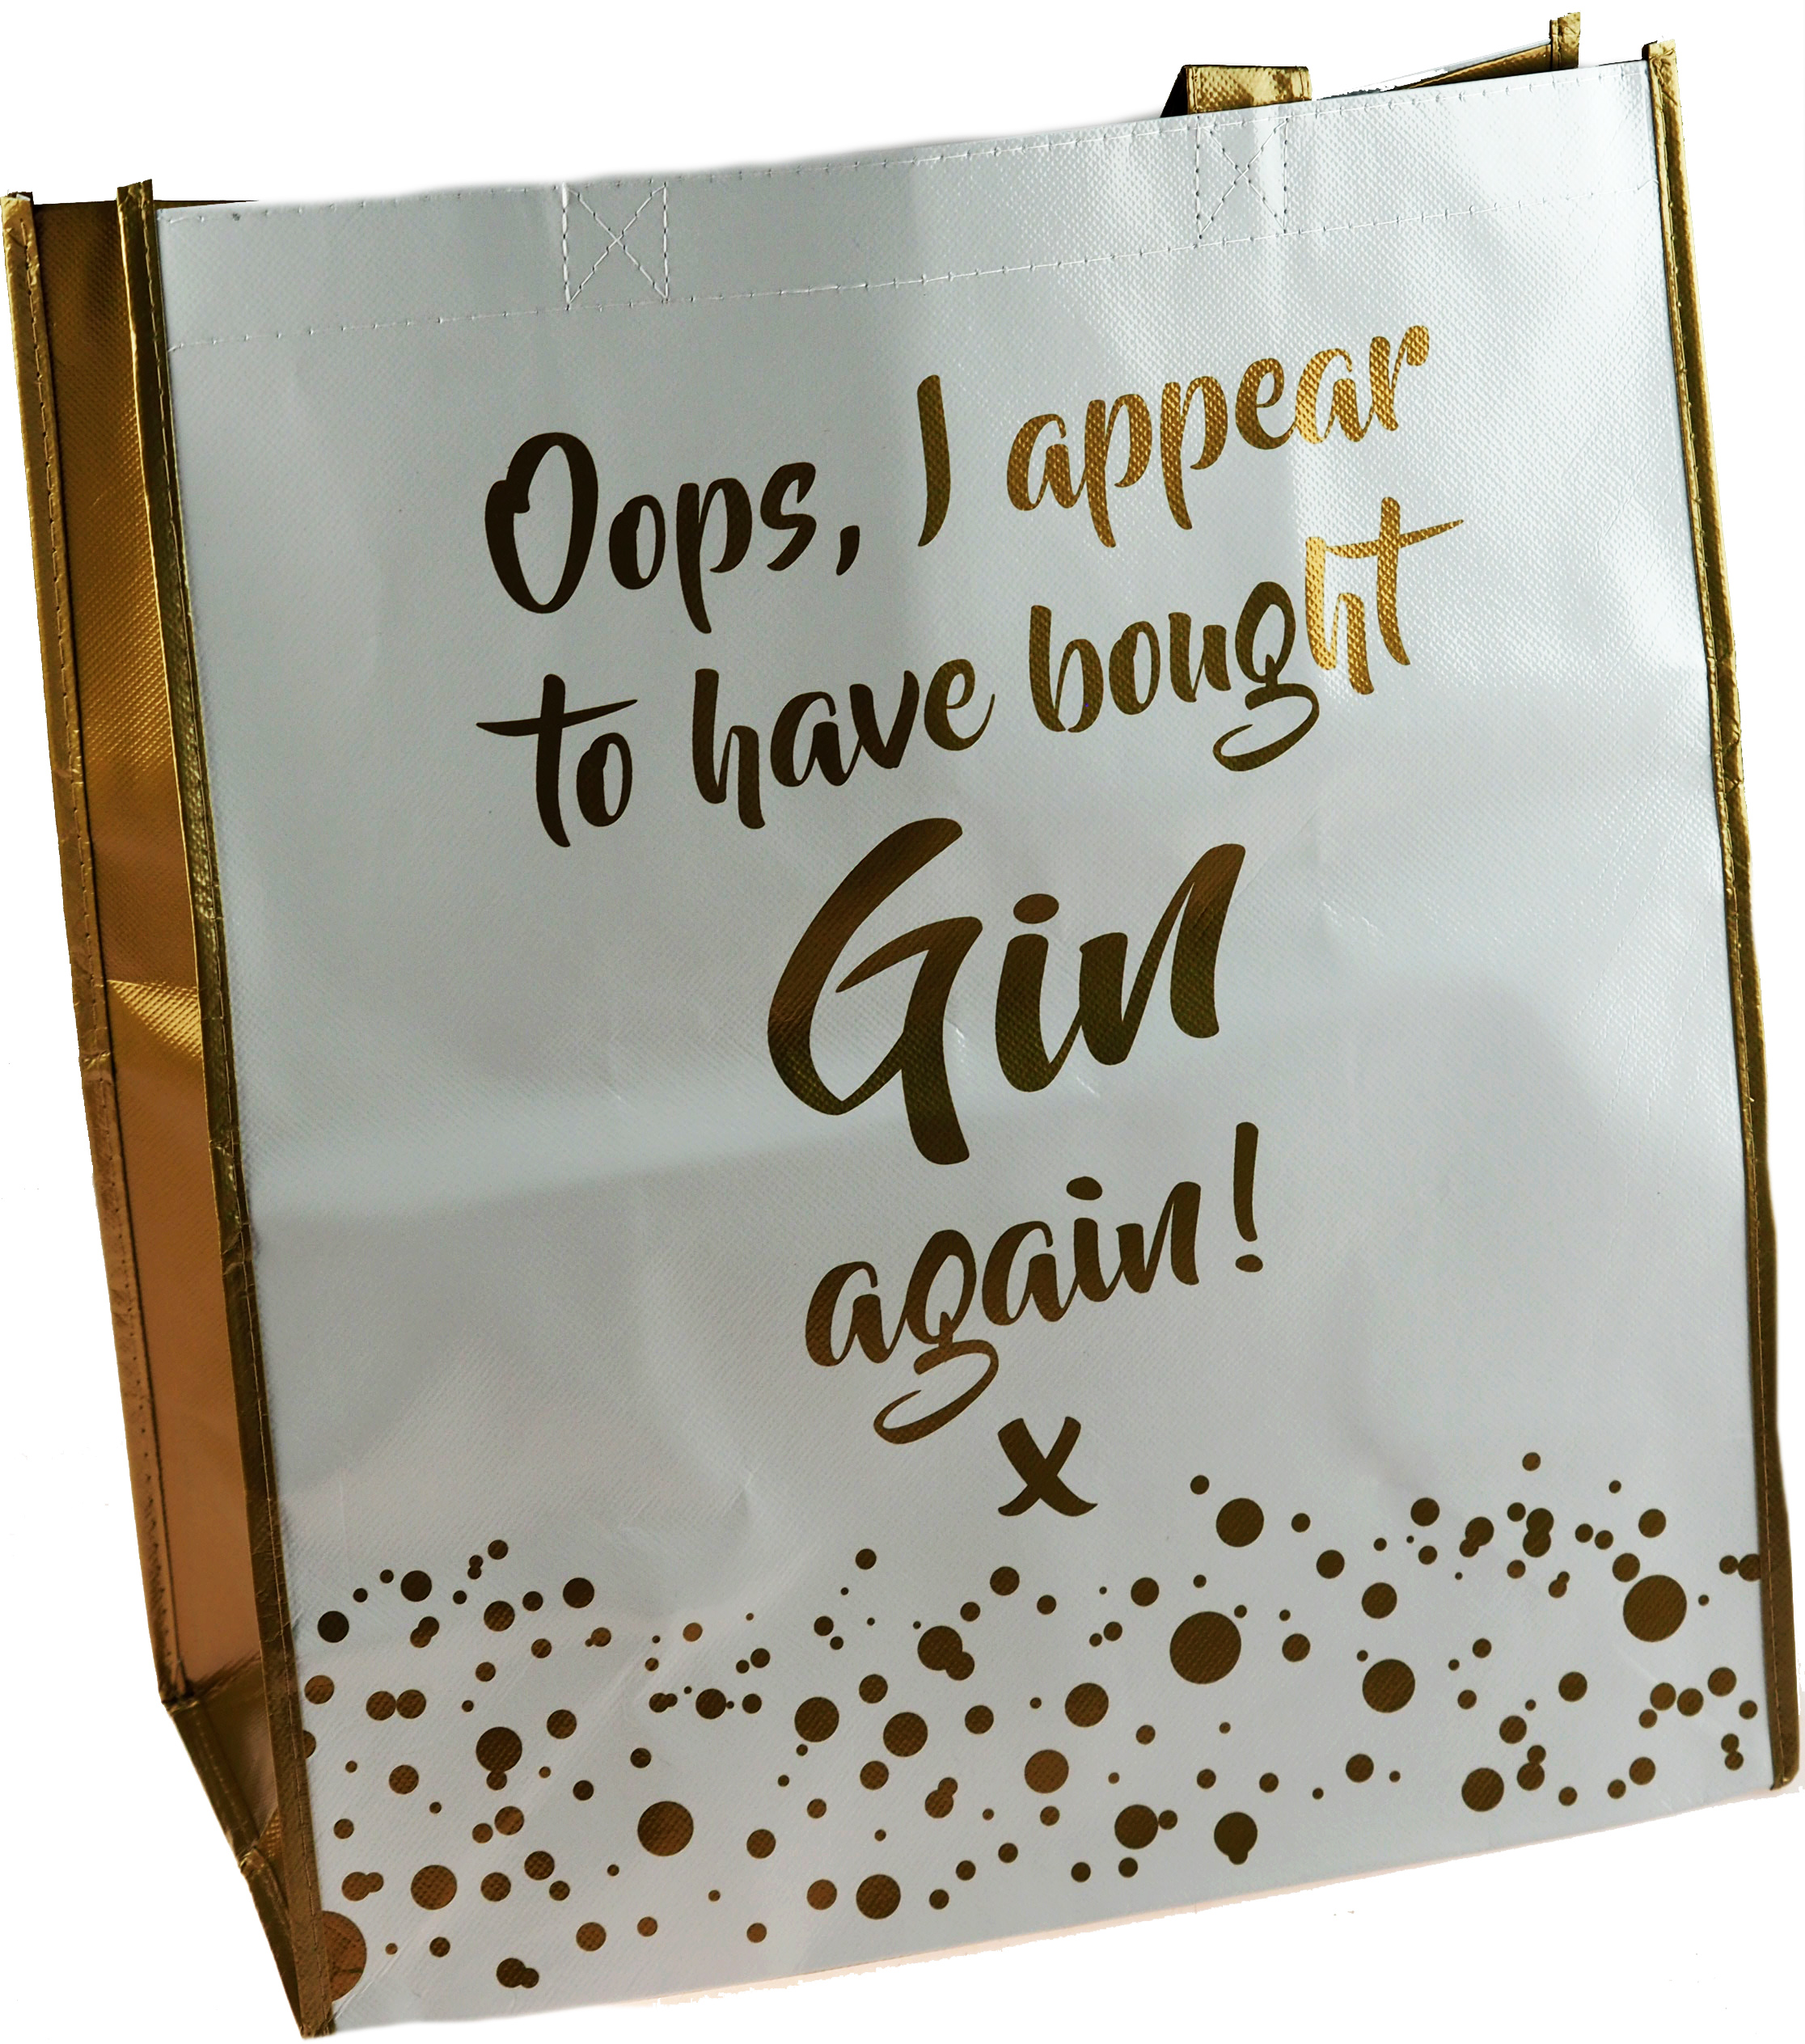 Novelty Fun Shopper Bag - 'Oops, I appear to have bought gin again!'